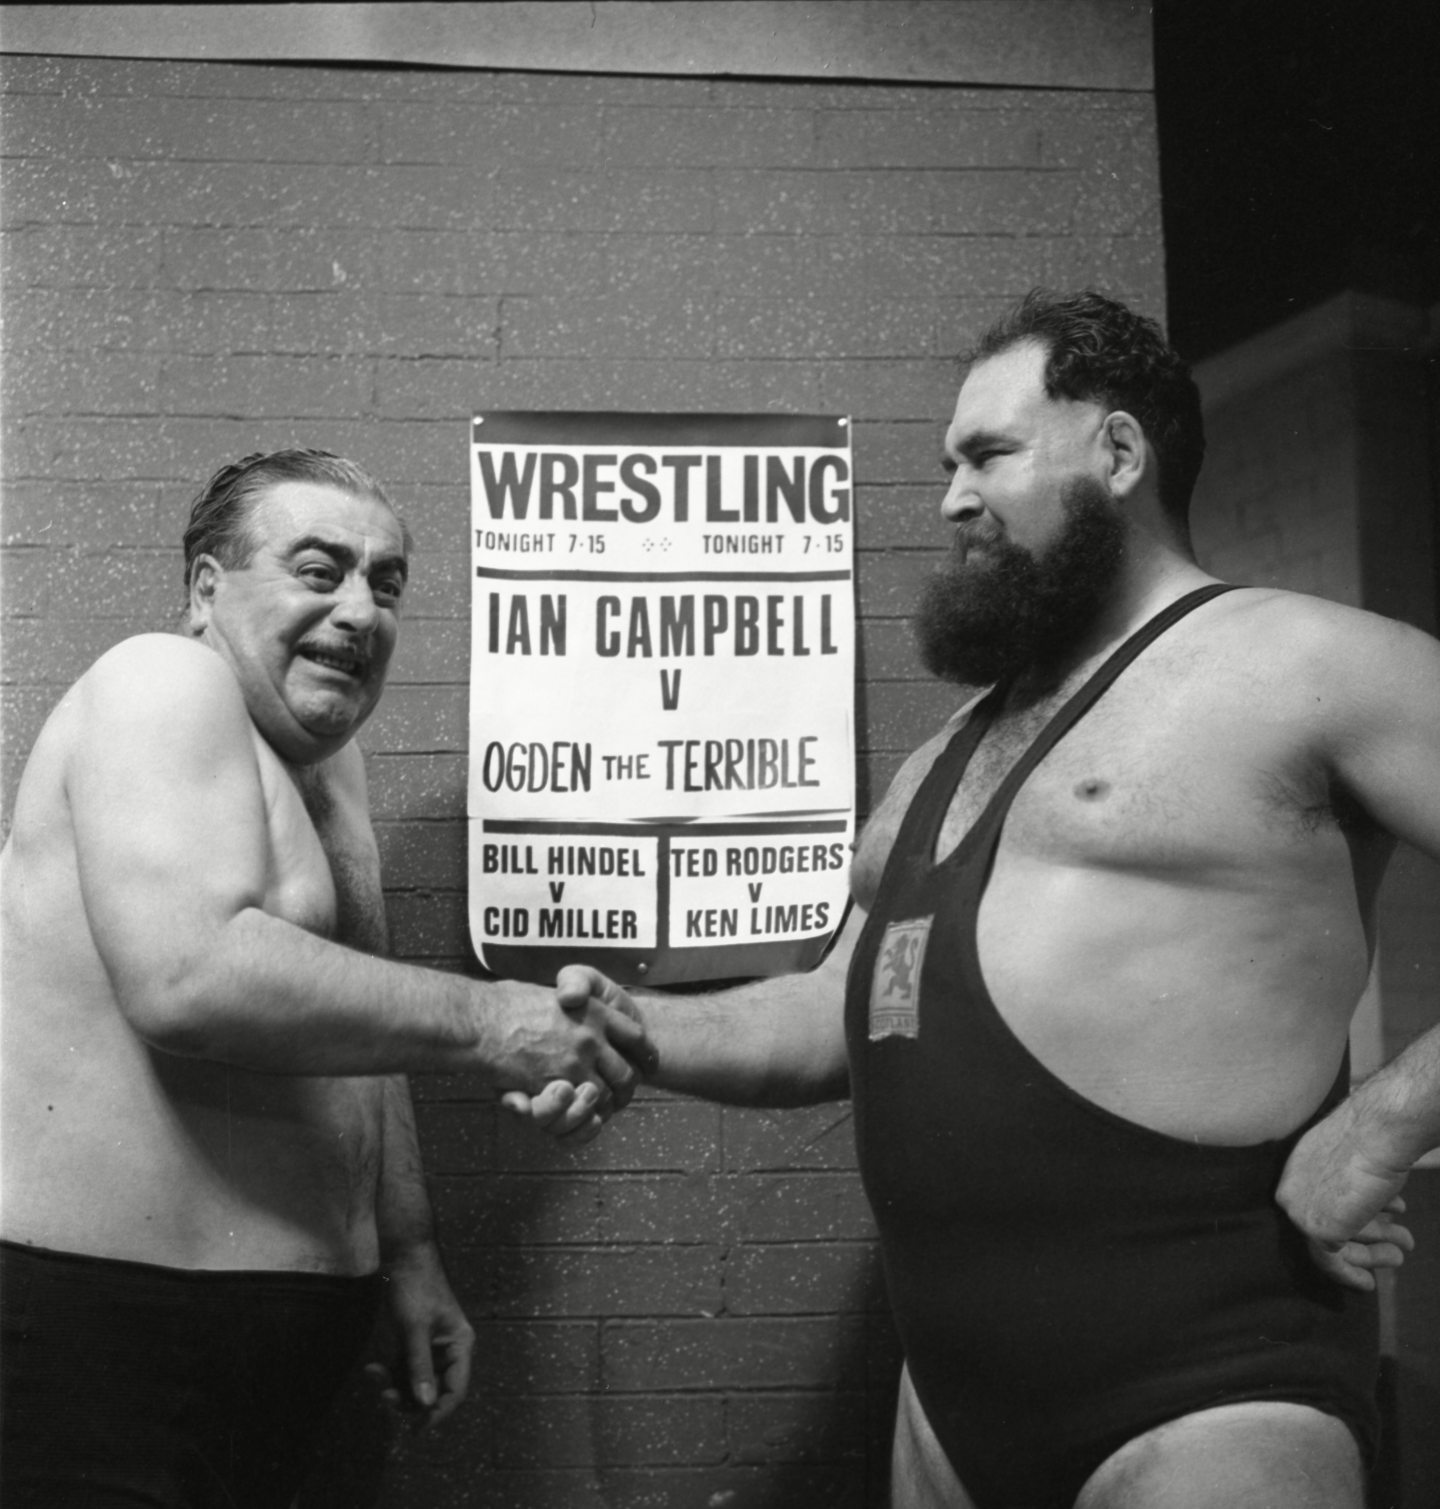 Stan Ogden shakes hands with Ian Campbell before their wrestling match in Coronation Street. Image: ITV/Shutterstock.